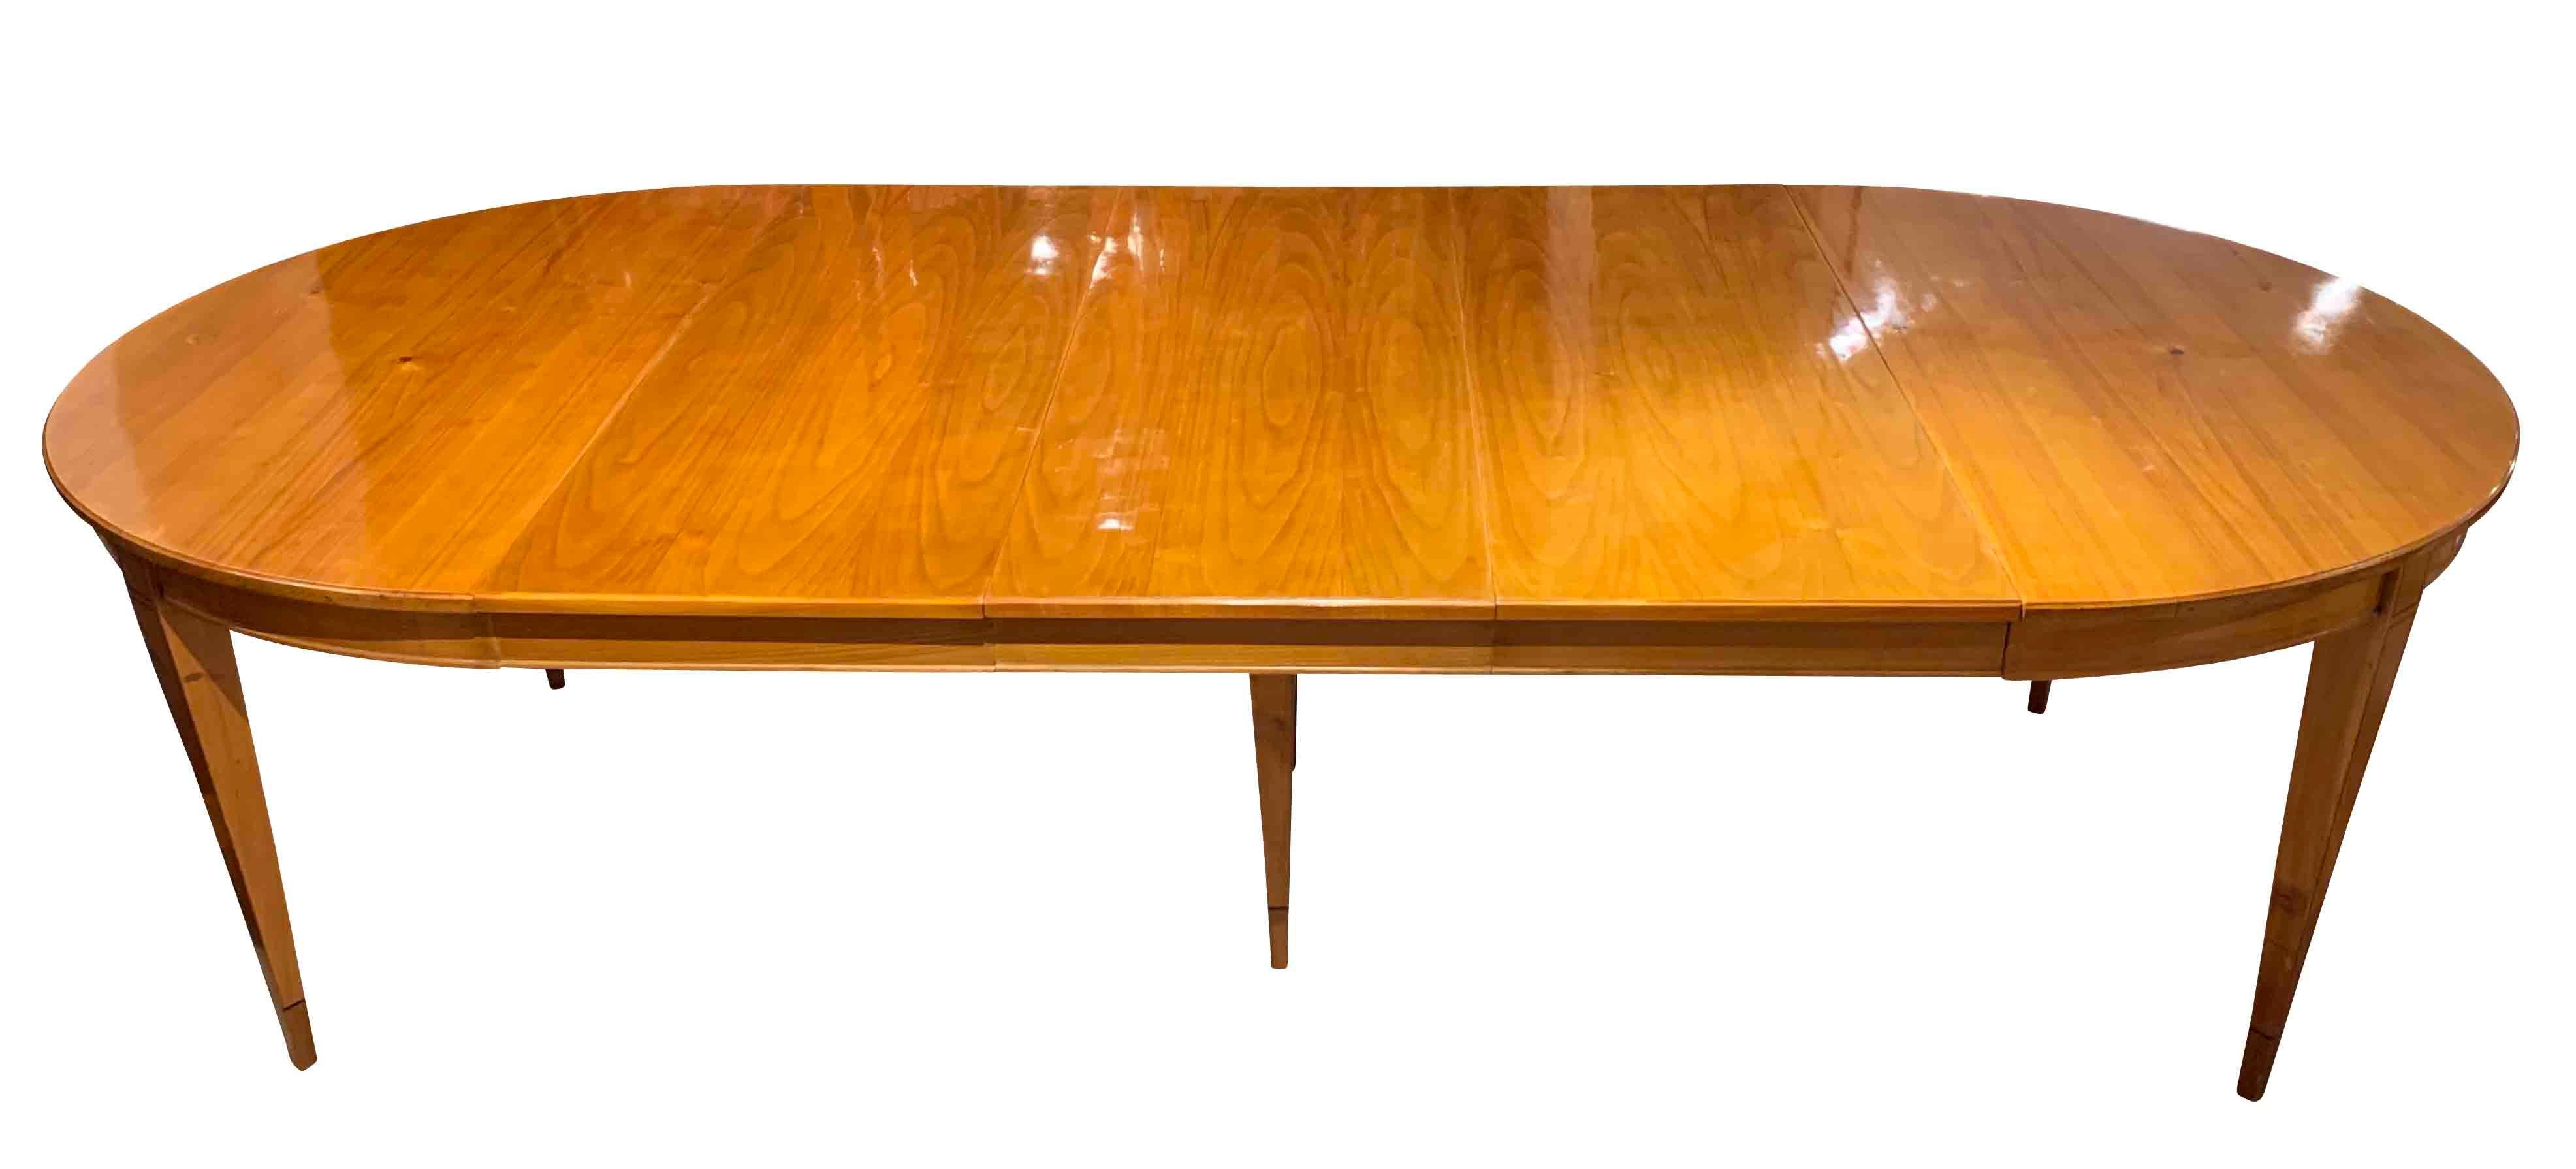 Beautiful Biedermeier expandable / extending / pull-out dining room table

Closed oval form with three inlay plates a 48.5 cm / 19.1 in (supplemented)
Conical square-pointed legs with ebony inlay band.
Wood: Cherry solid (Plate and legs) and